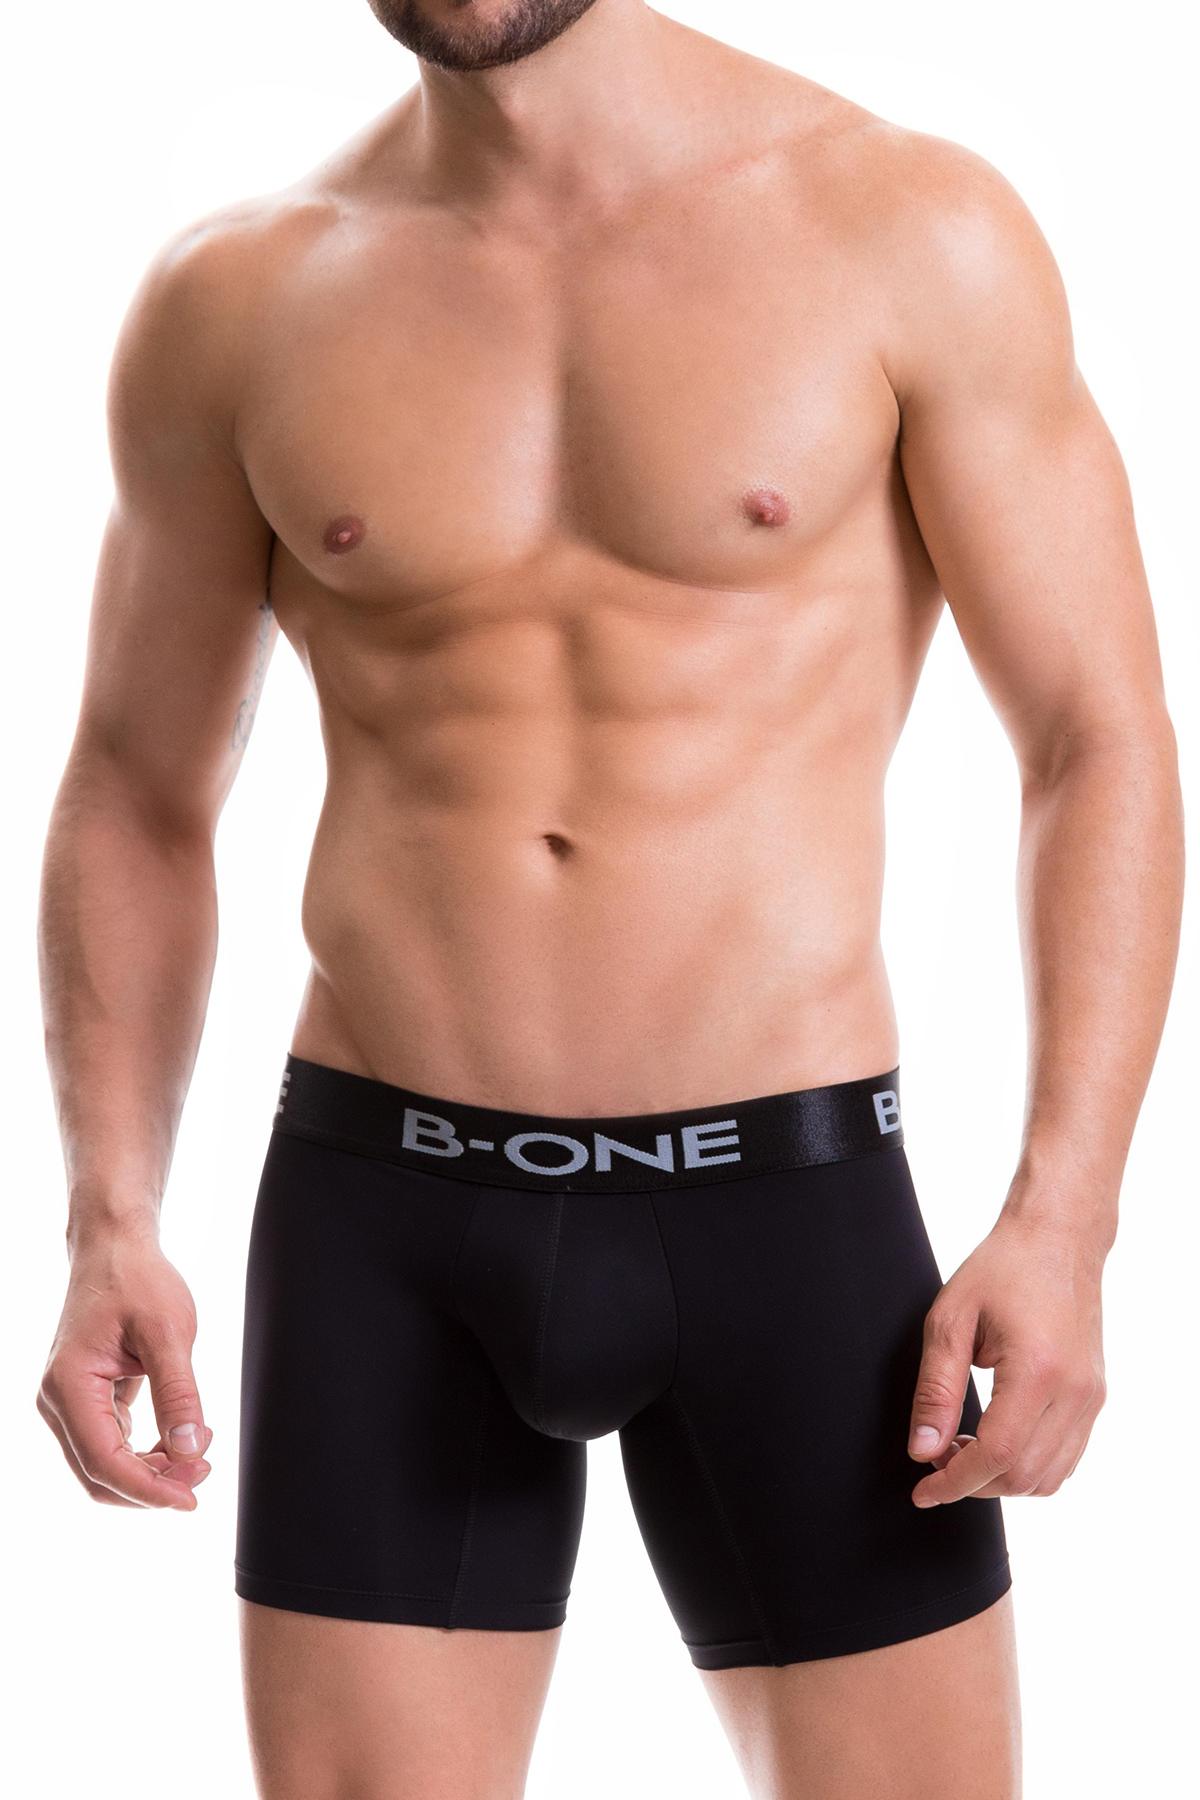 B-One by JOR Black Classic Boxer Brief